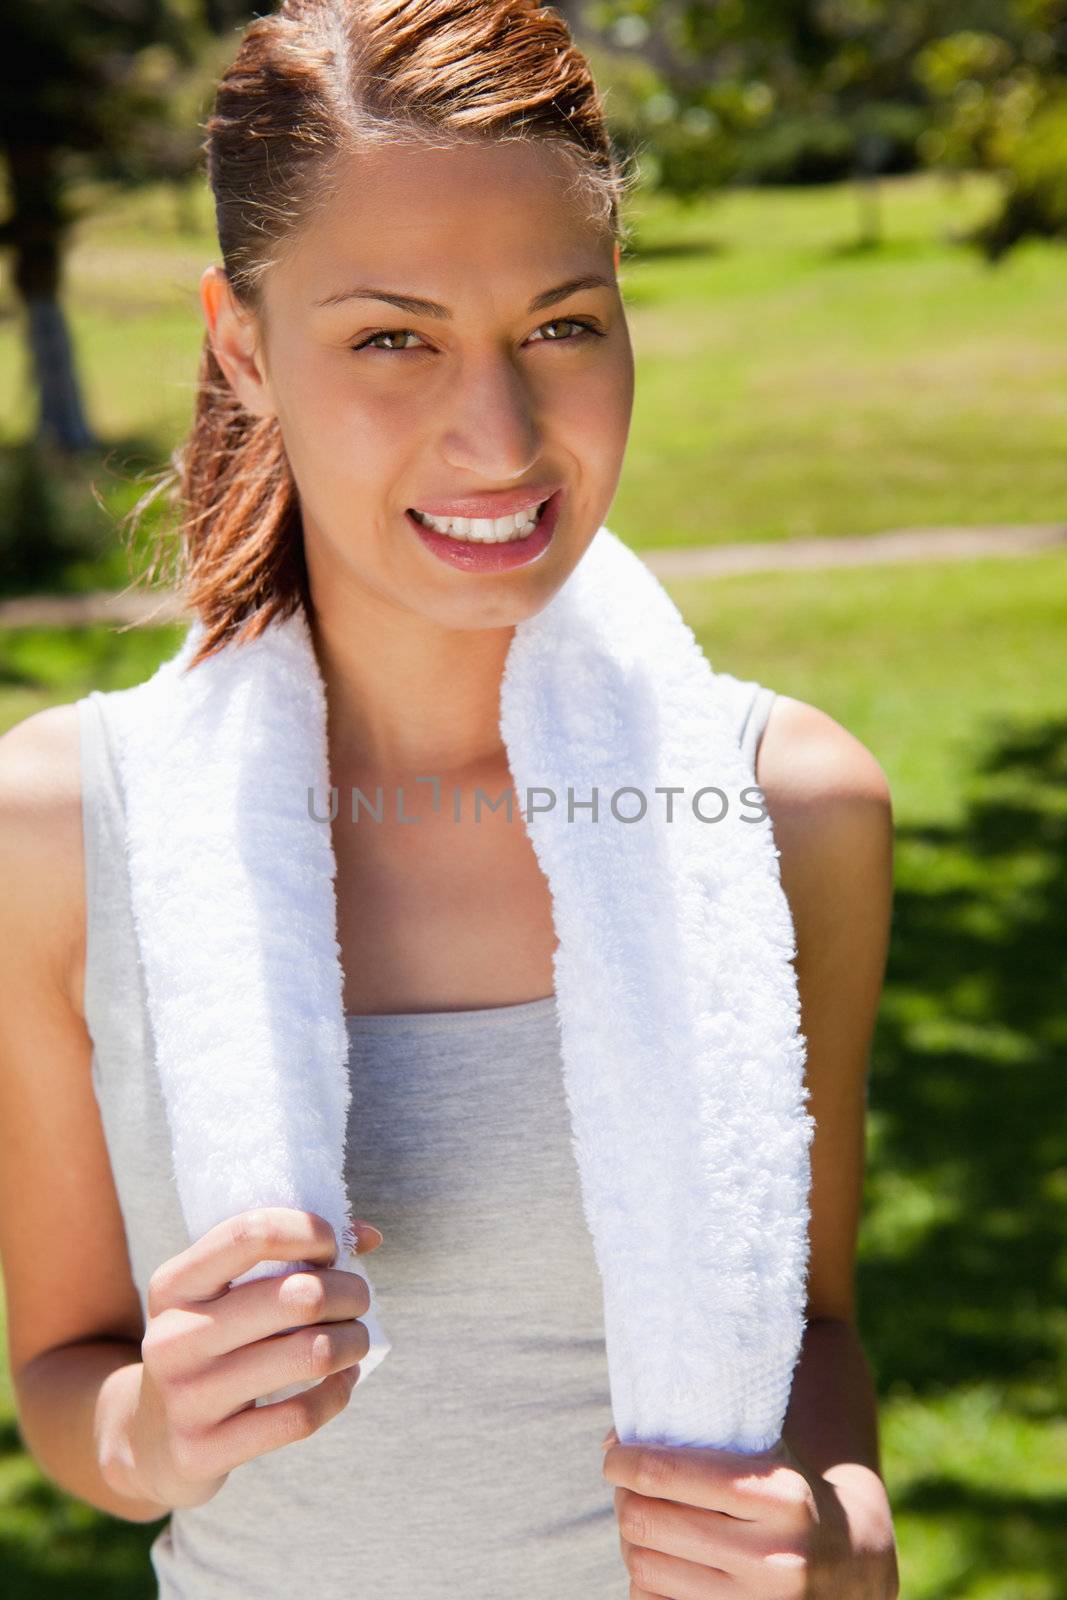 Smiling woman holding a towel by Wavebreakmedia